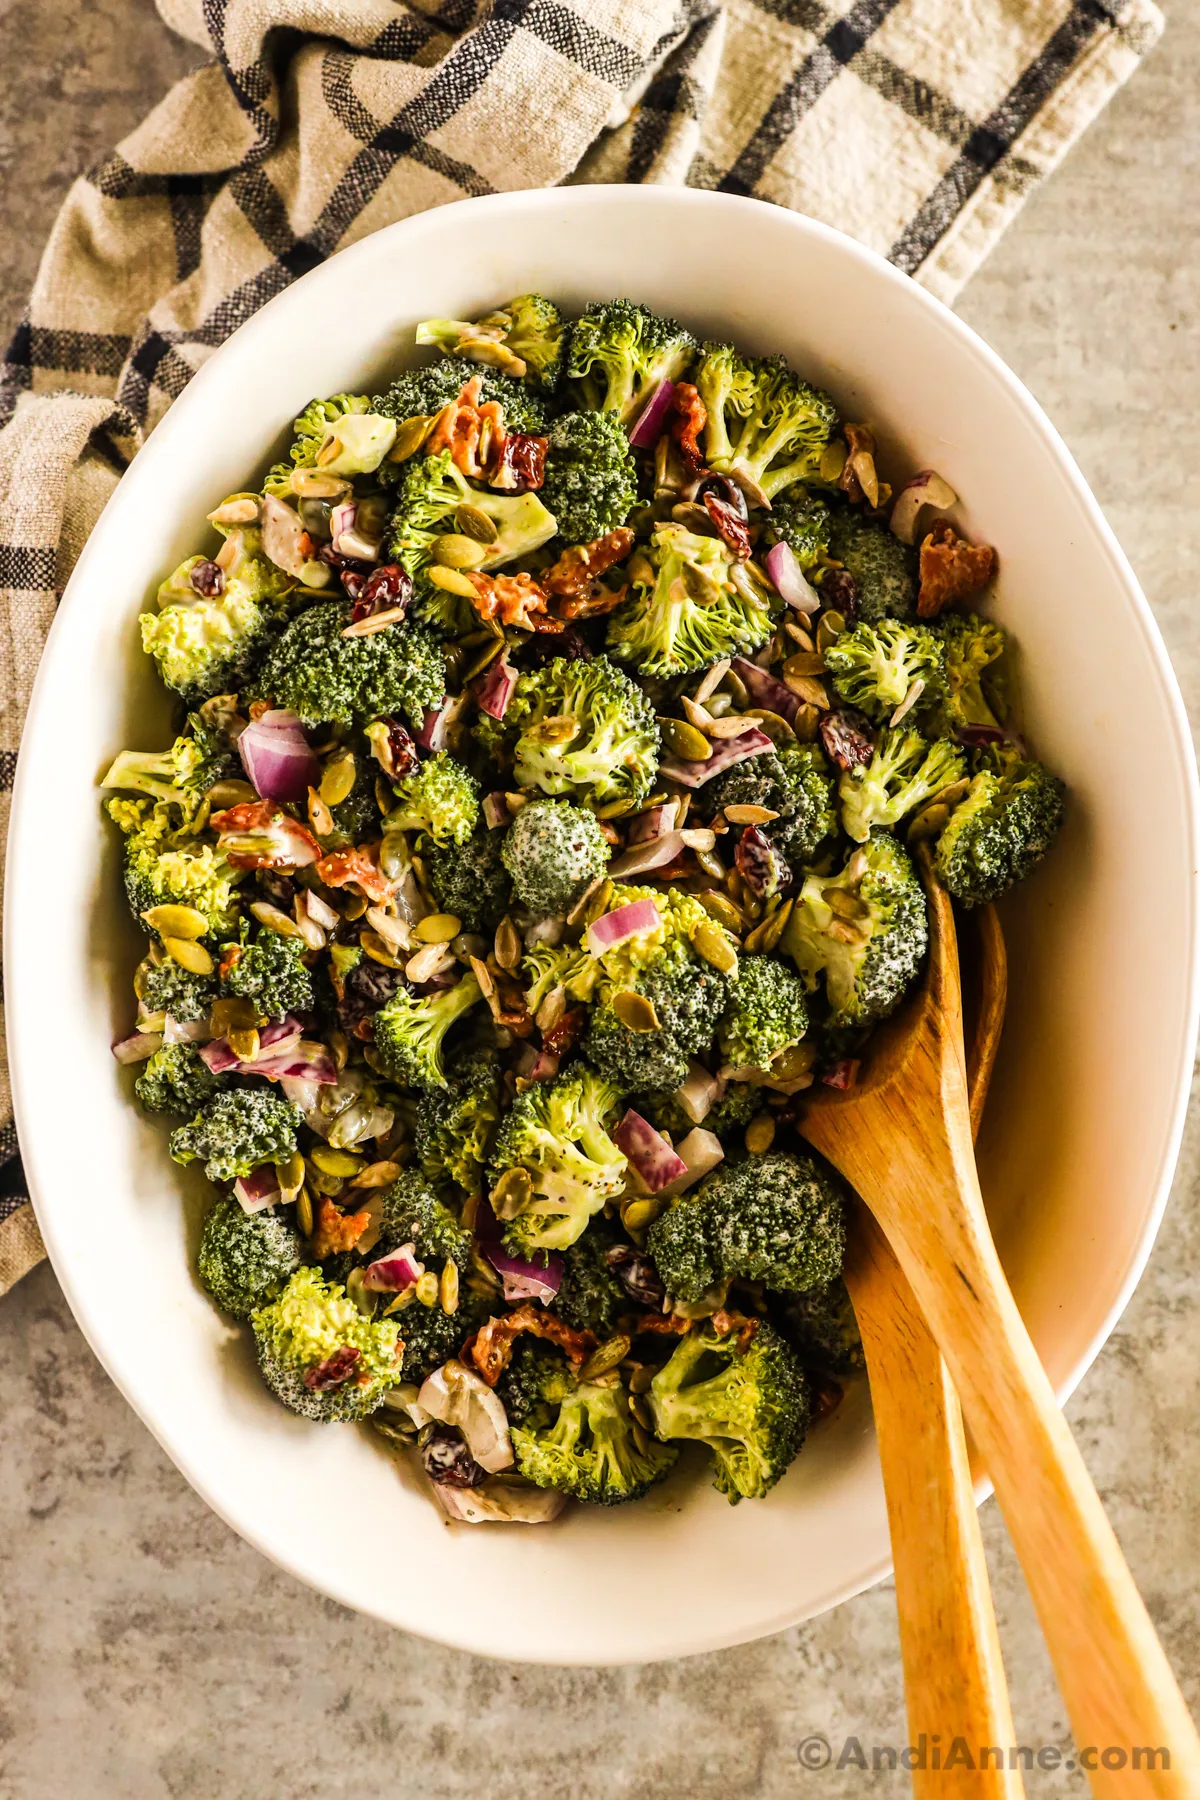 Broccoli crunch salad in a white bowl with wood spoons.